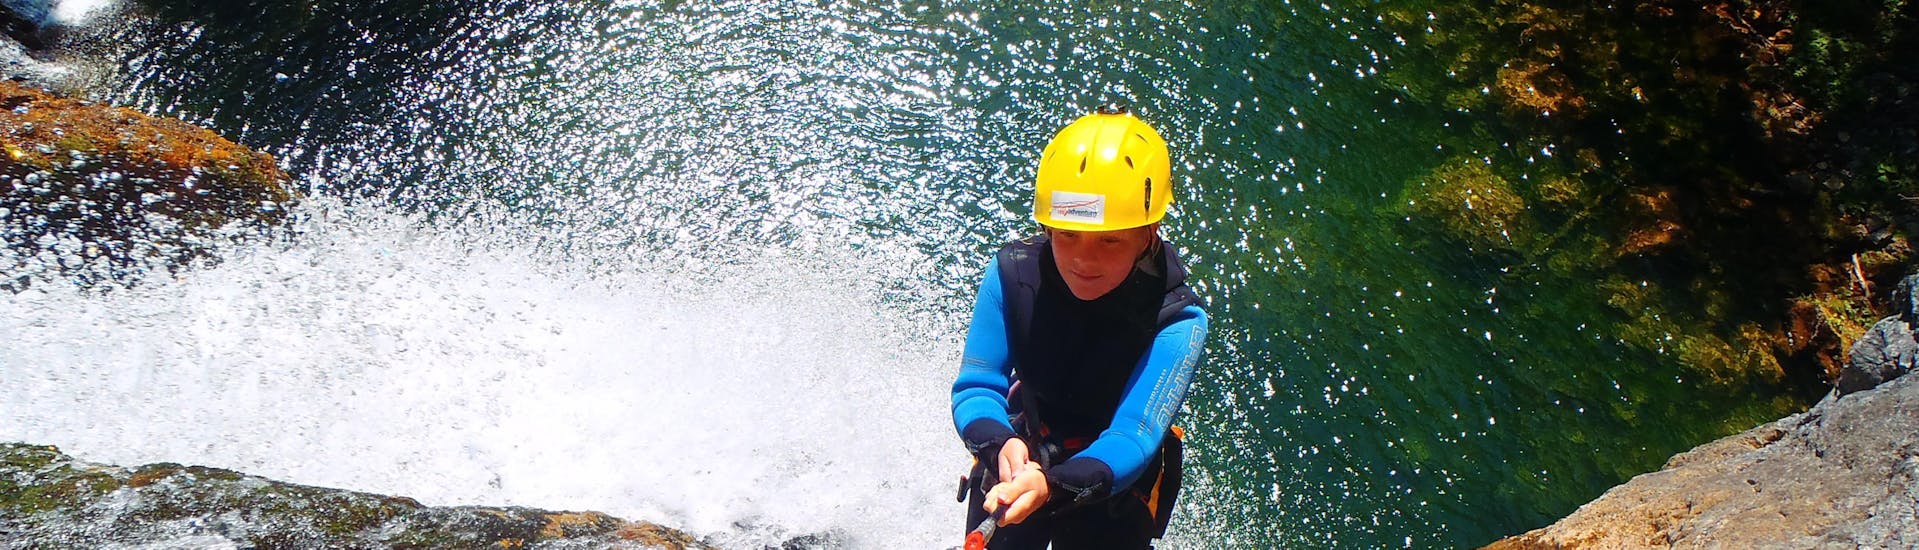 Canyoning di media difficoltà a Schladming.